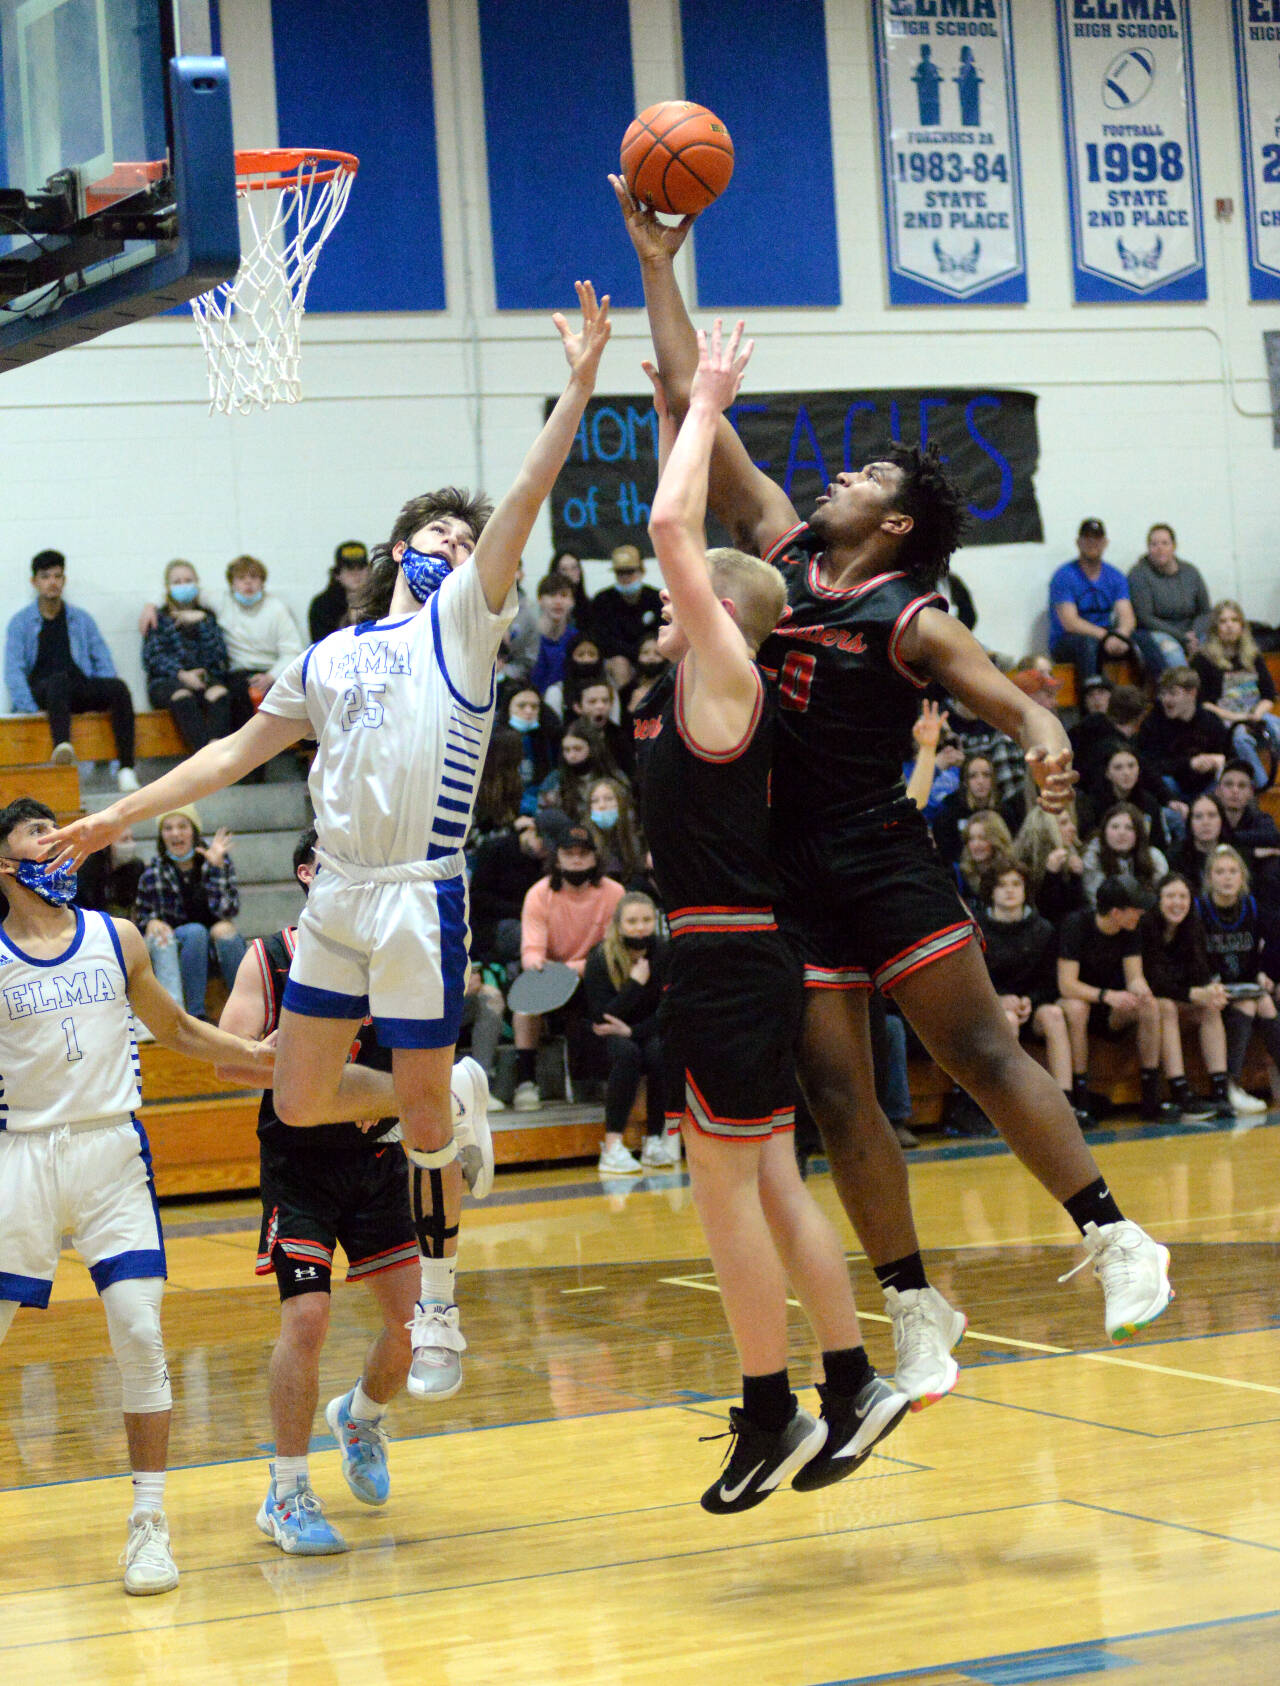 RYAN SPARKS | THE DAILY WORLD Elma’s Gibson Cain (25) and Tenino’s Takari Hickle (0) leap for a rebound during Elma’s 50-47 loss on Tuesday in Elma.